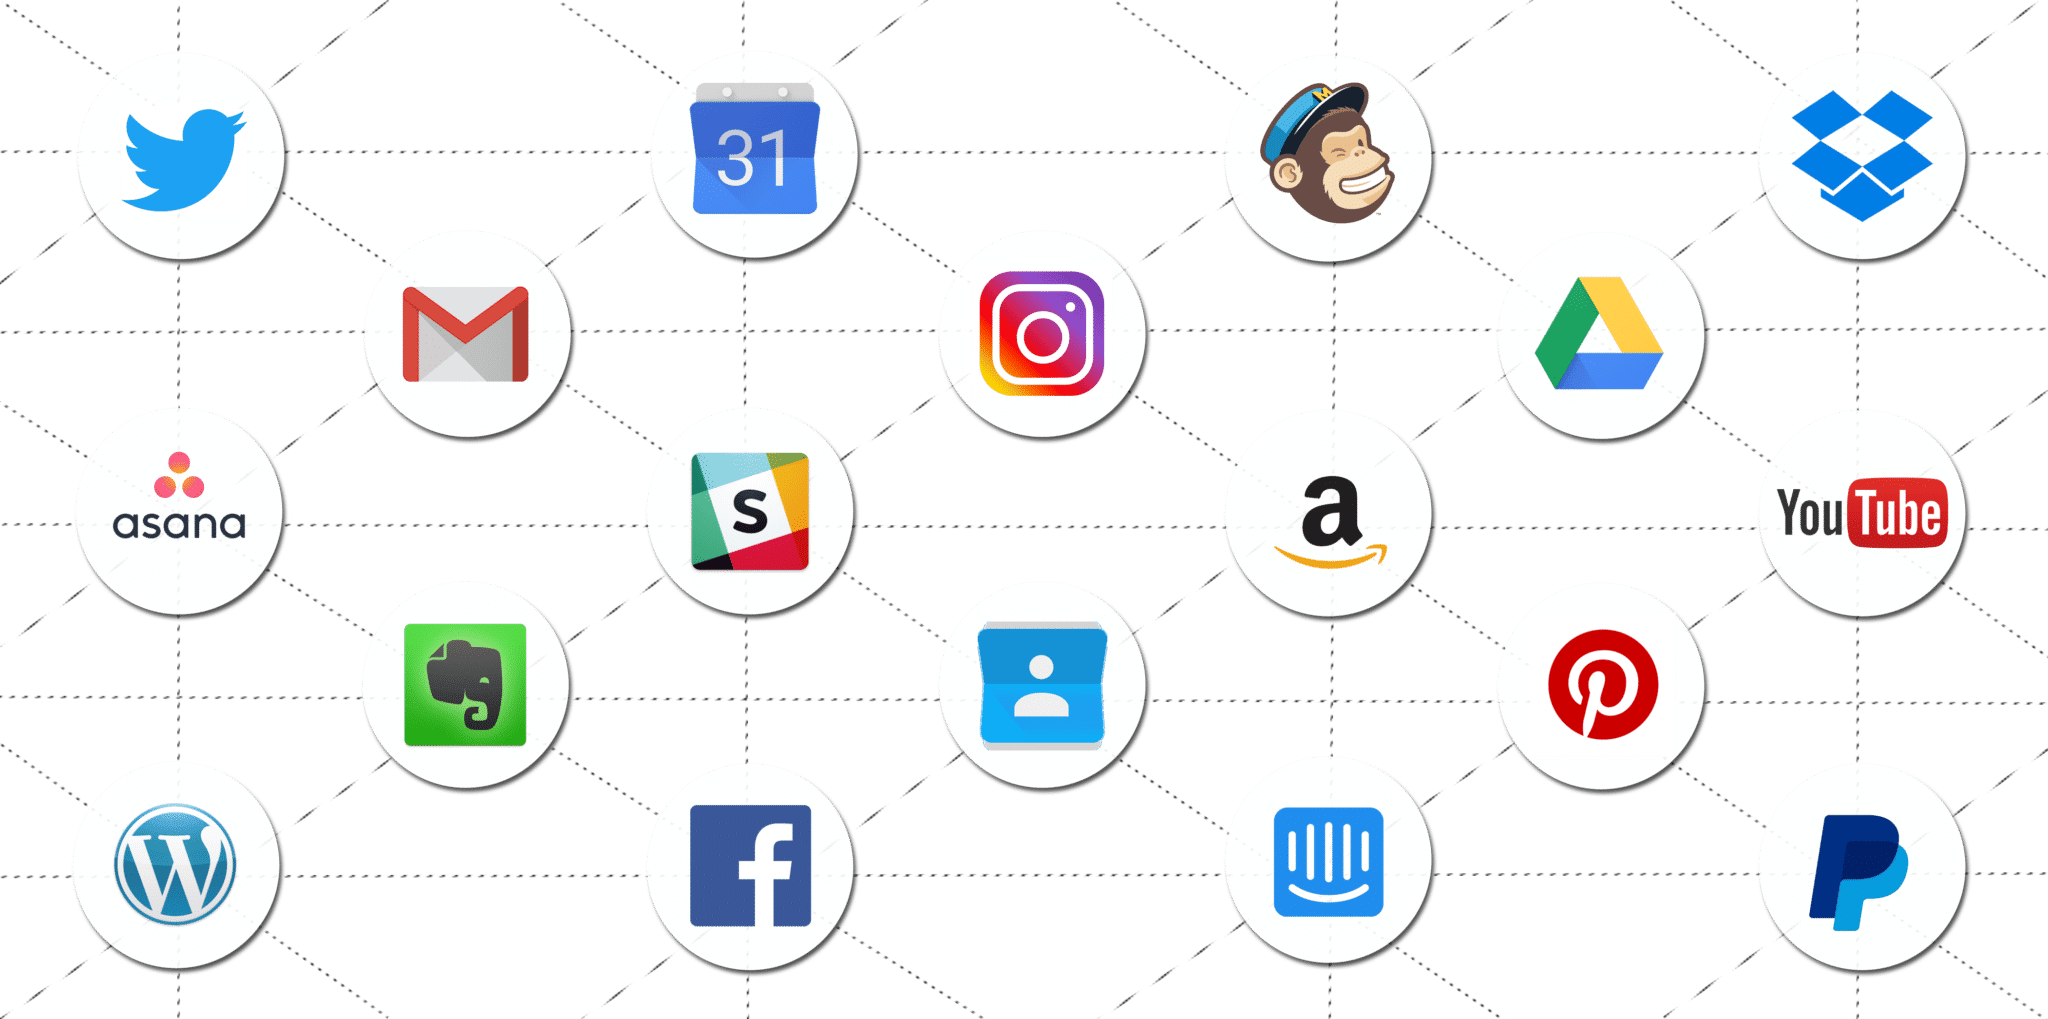 Zapier Apps Examples - Send SMS with Zapier and other Apps